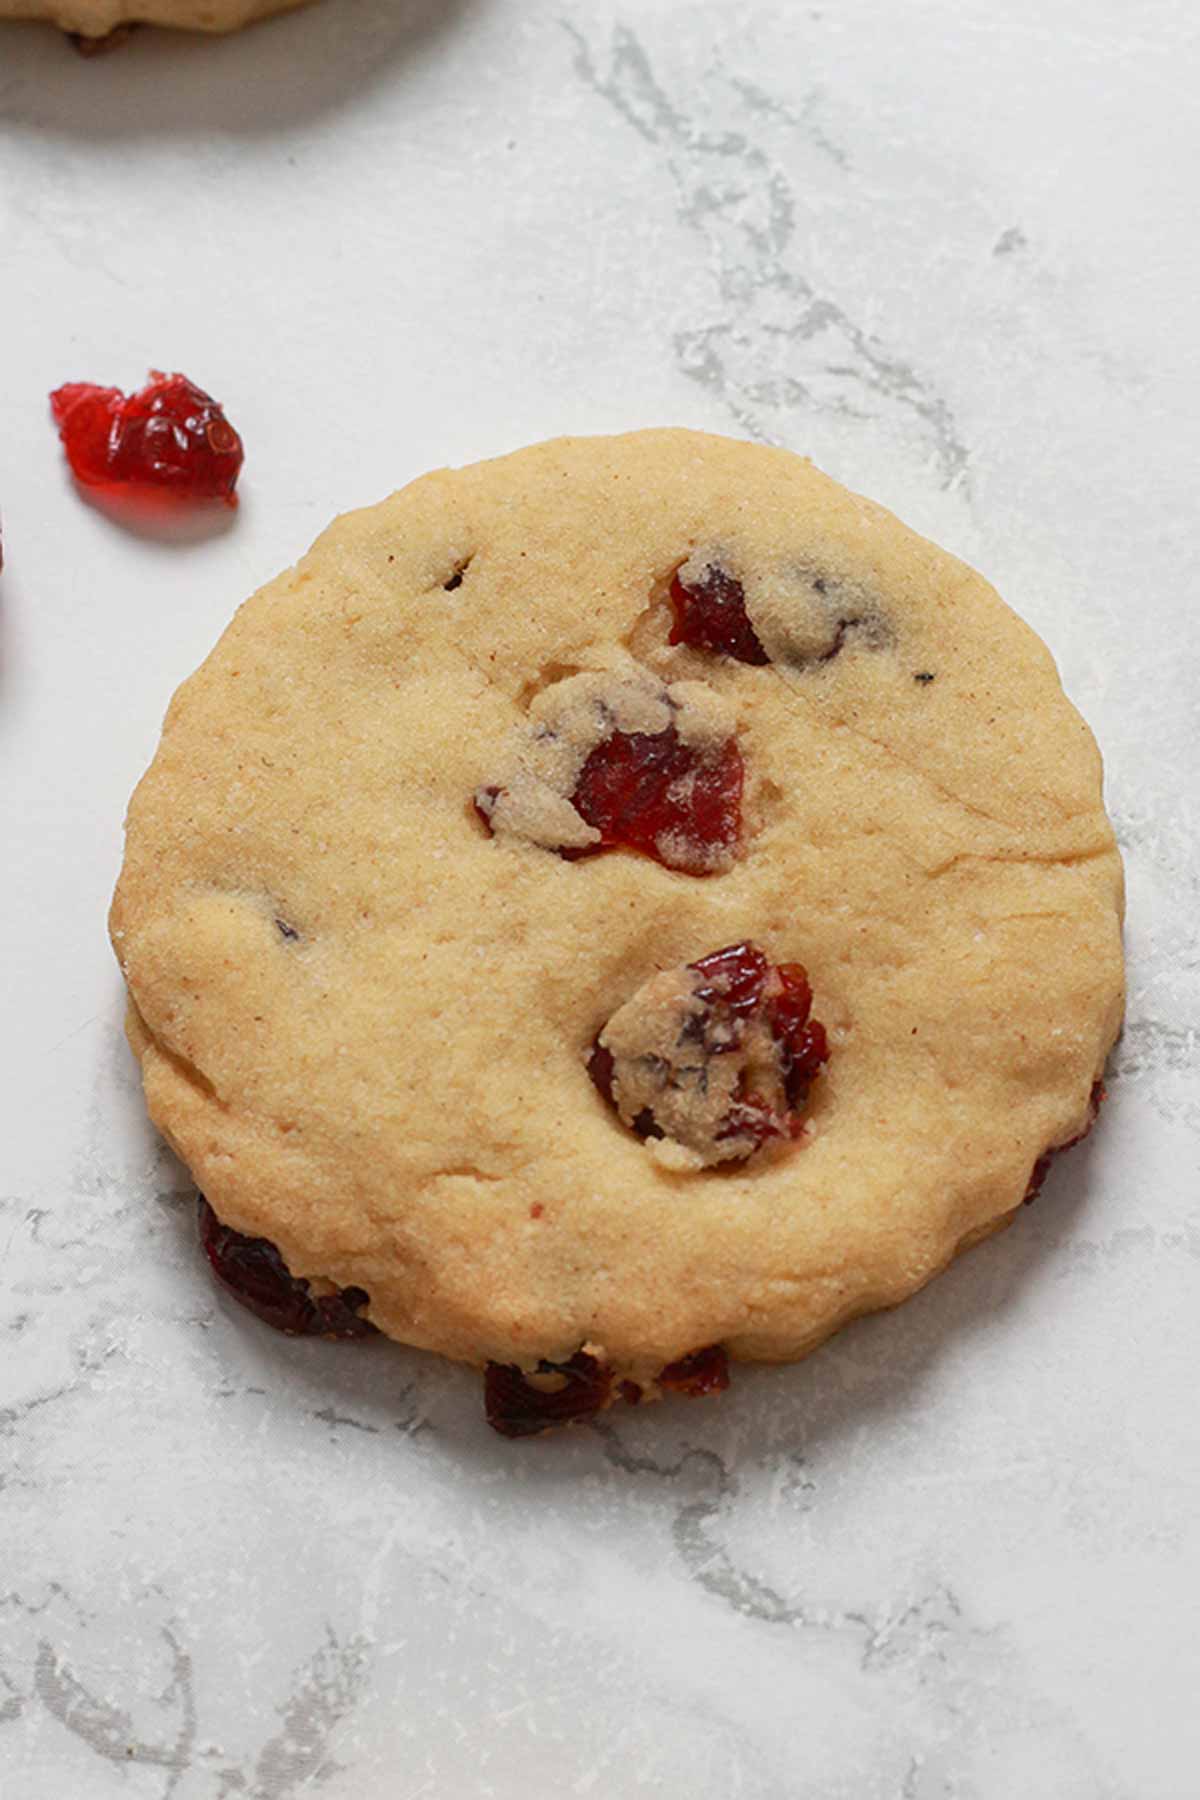 Overhead Shot Of Cranberry Shortbread Laying On White Surface